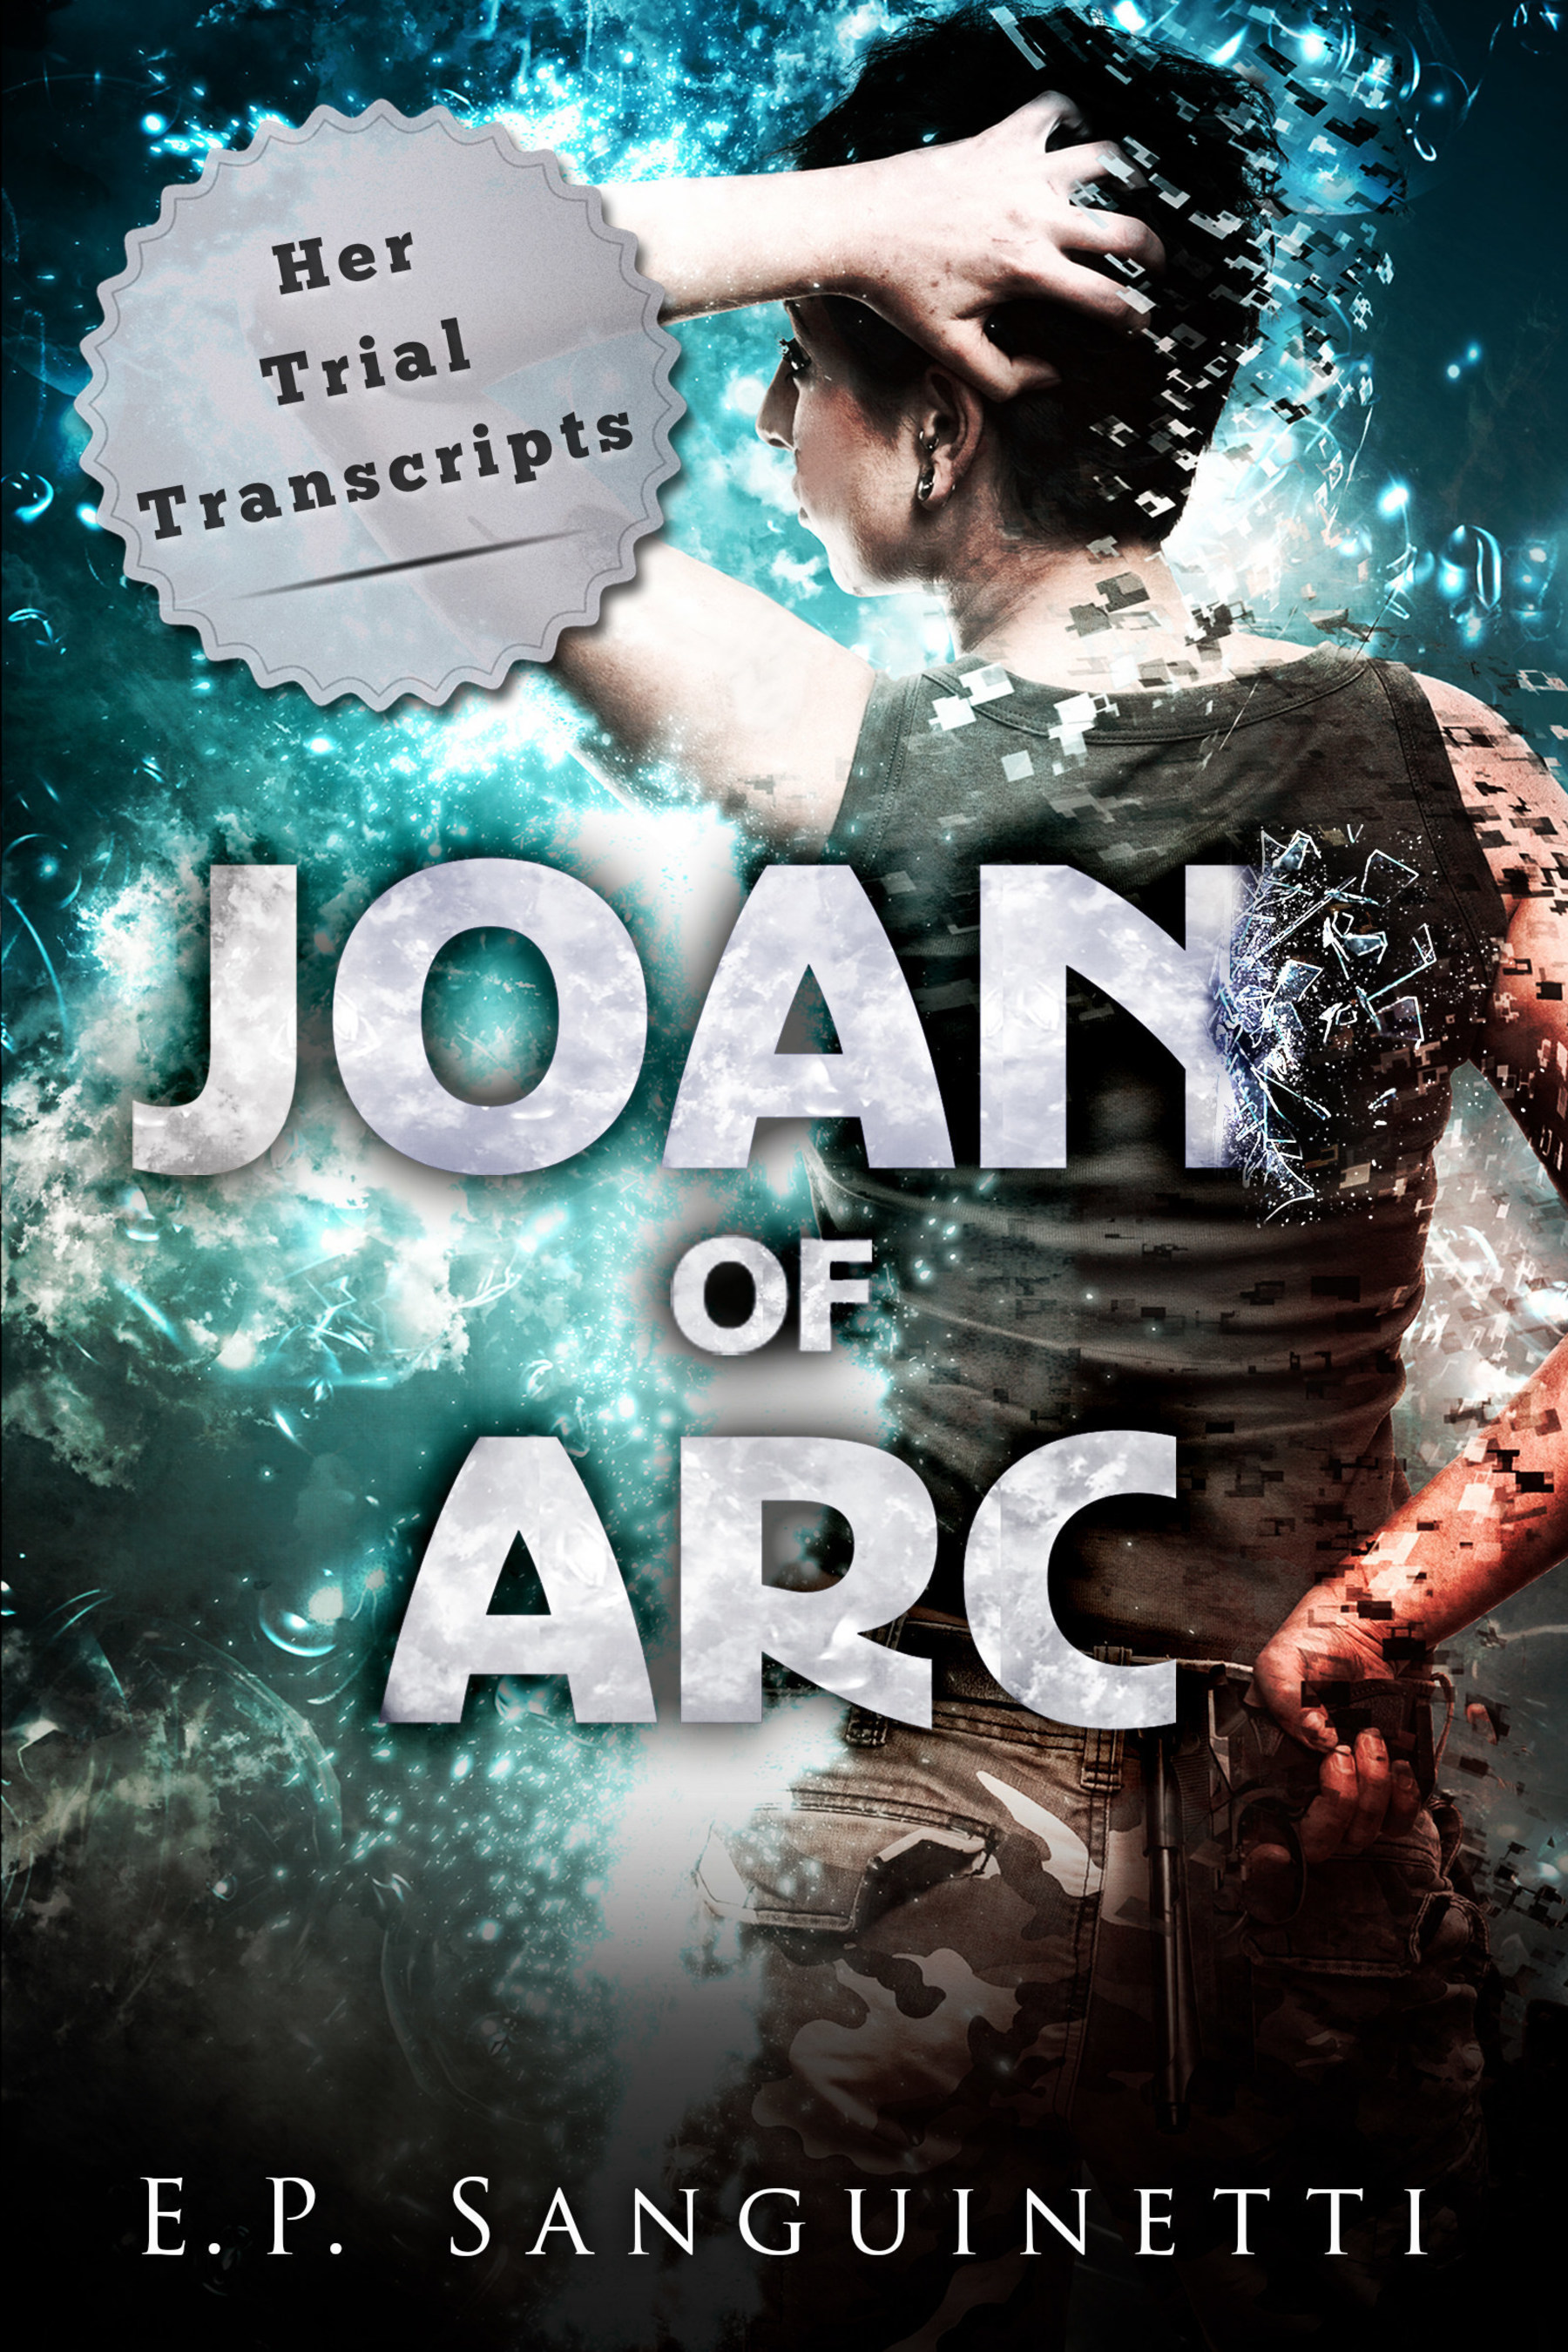 Joan of Arc: Her Trial Transcripts, by Emilia P. Sanguinetti